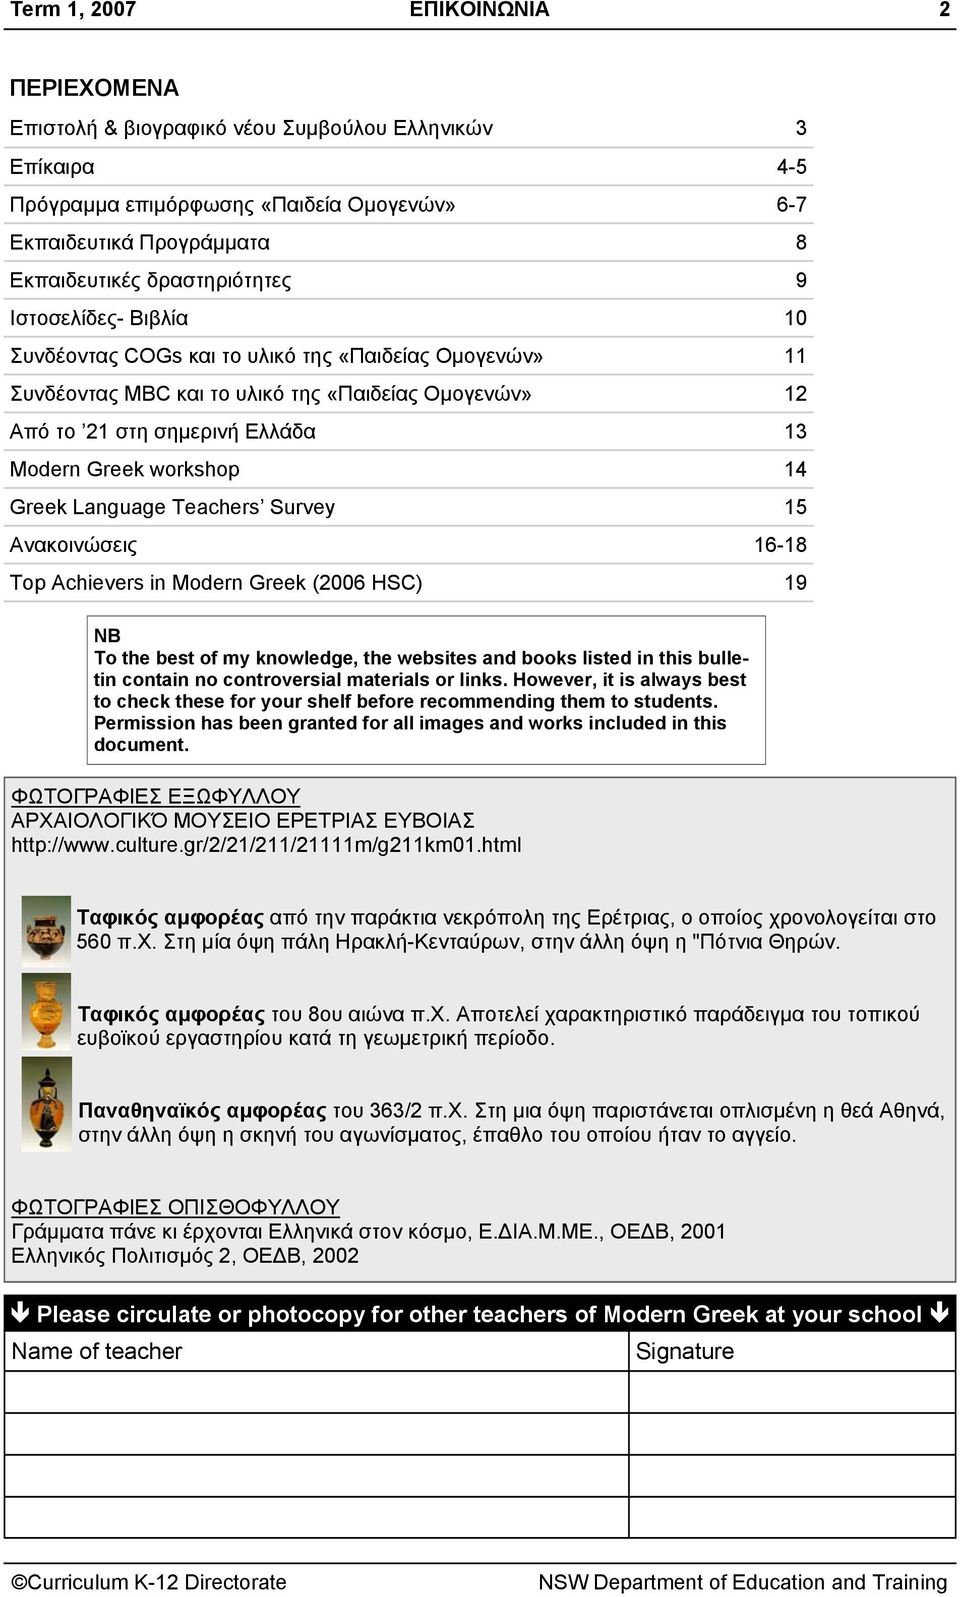 Greek Language Teachers Survey 15 Ανακοινώσεις 16-18 Τop Achievers in (2006 HSC) 19 NB To the best of my knowledge, the websites and books listed in this bulletin contain no controversial materials